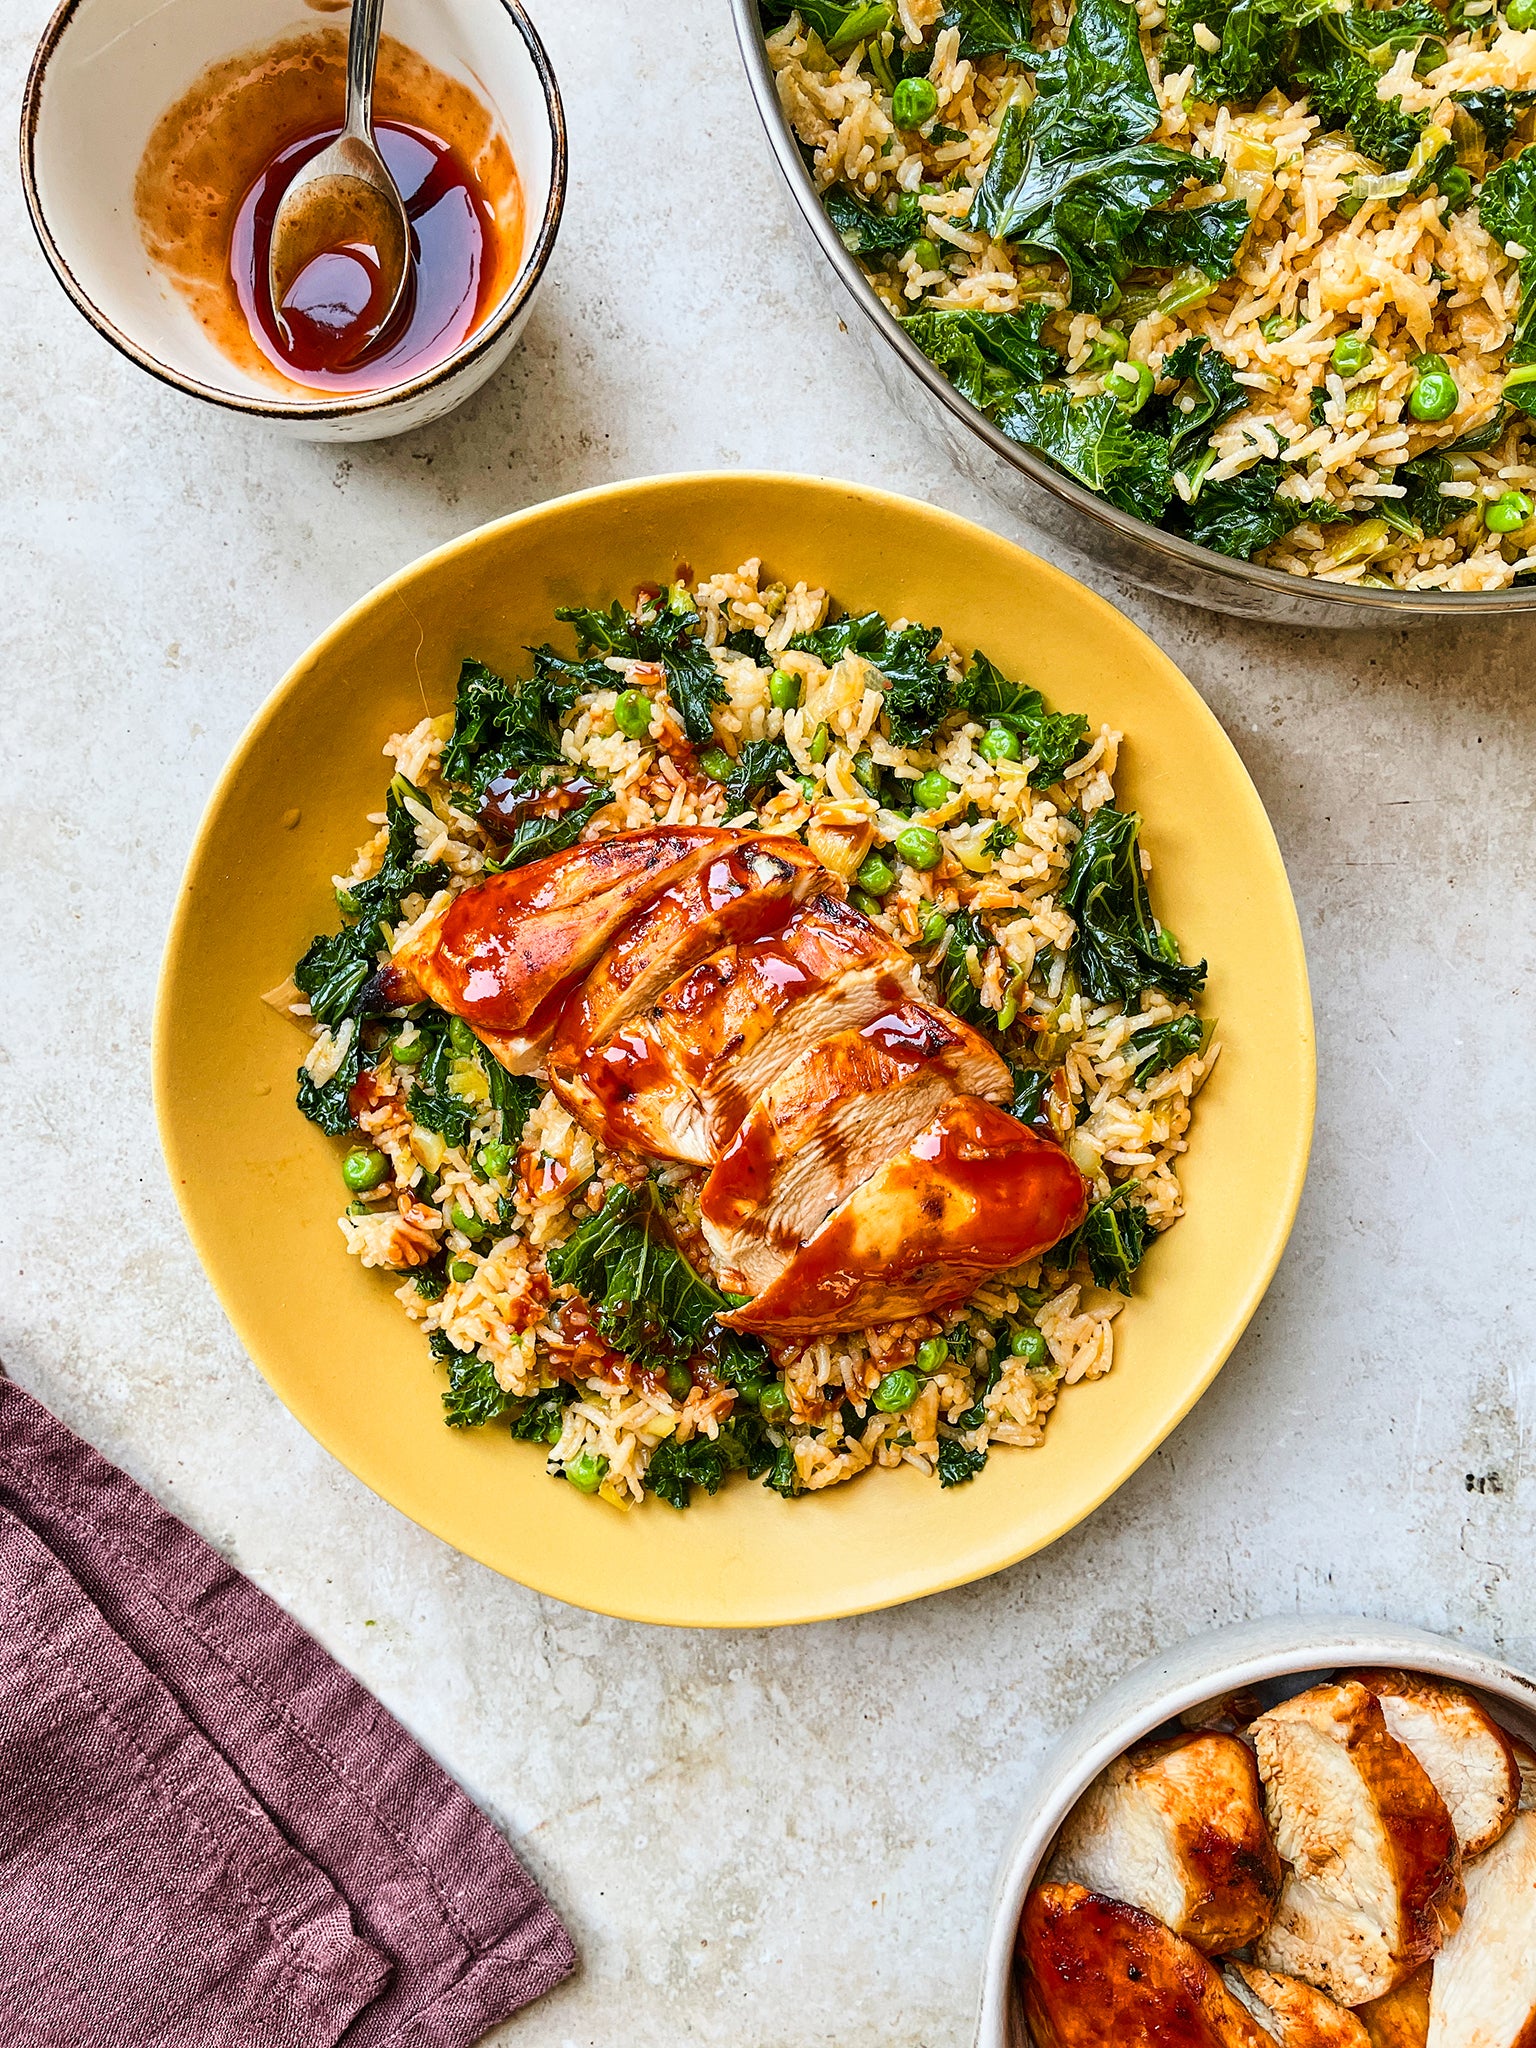 The sticky chicken, kale and rice makes a delicious yet nutritious takeaway alternative